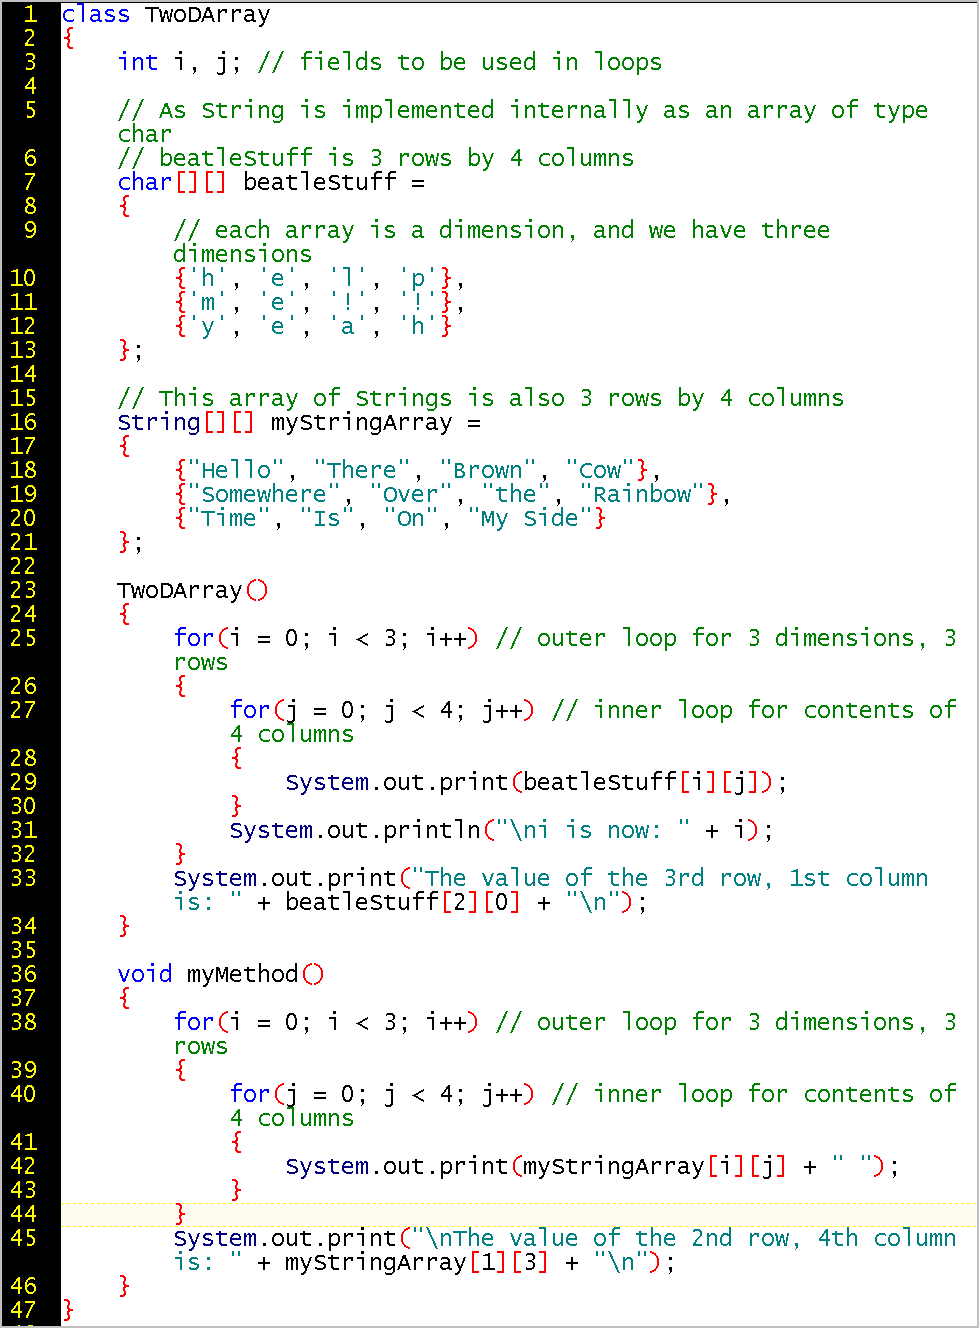 Write a string constant that is the empty string